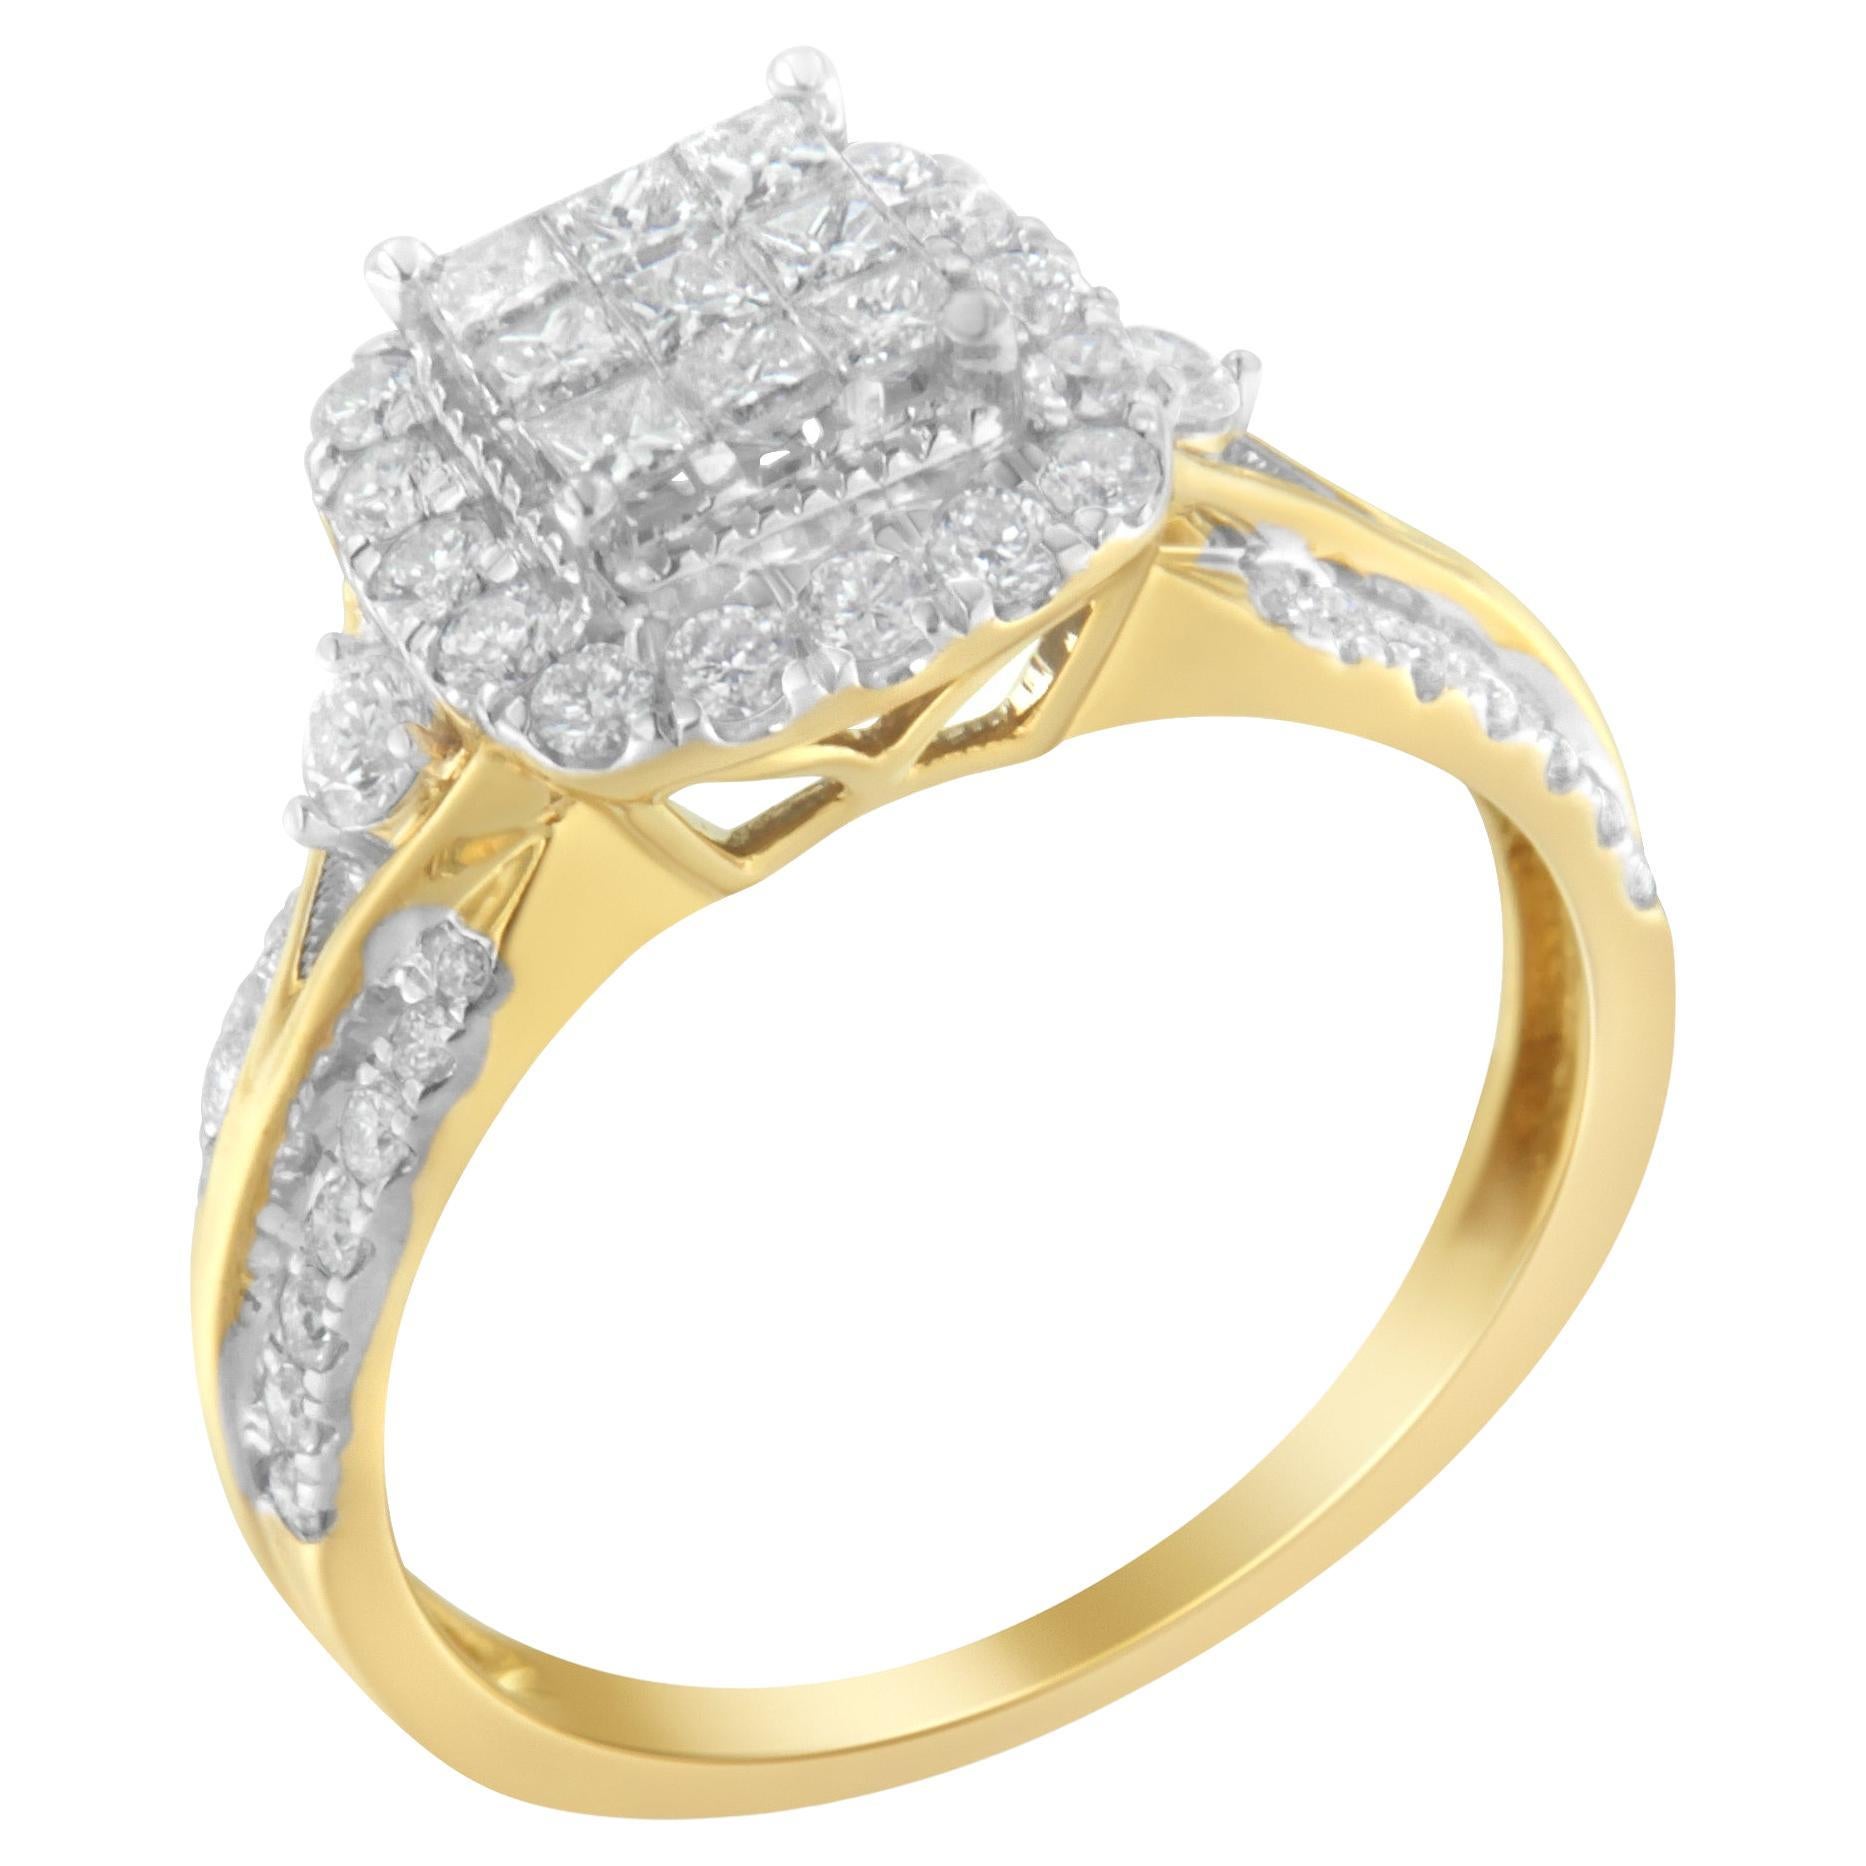 For Sale:  10K Yellow Gold 1.0 Carat Diamond Cluster Halo Triple-Band-Look Engagement Ring